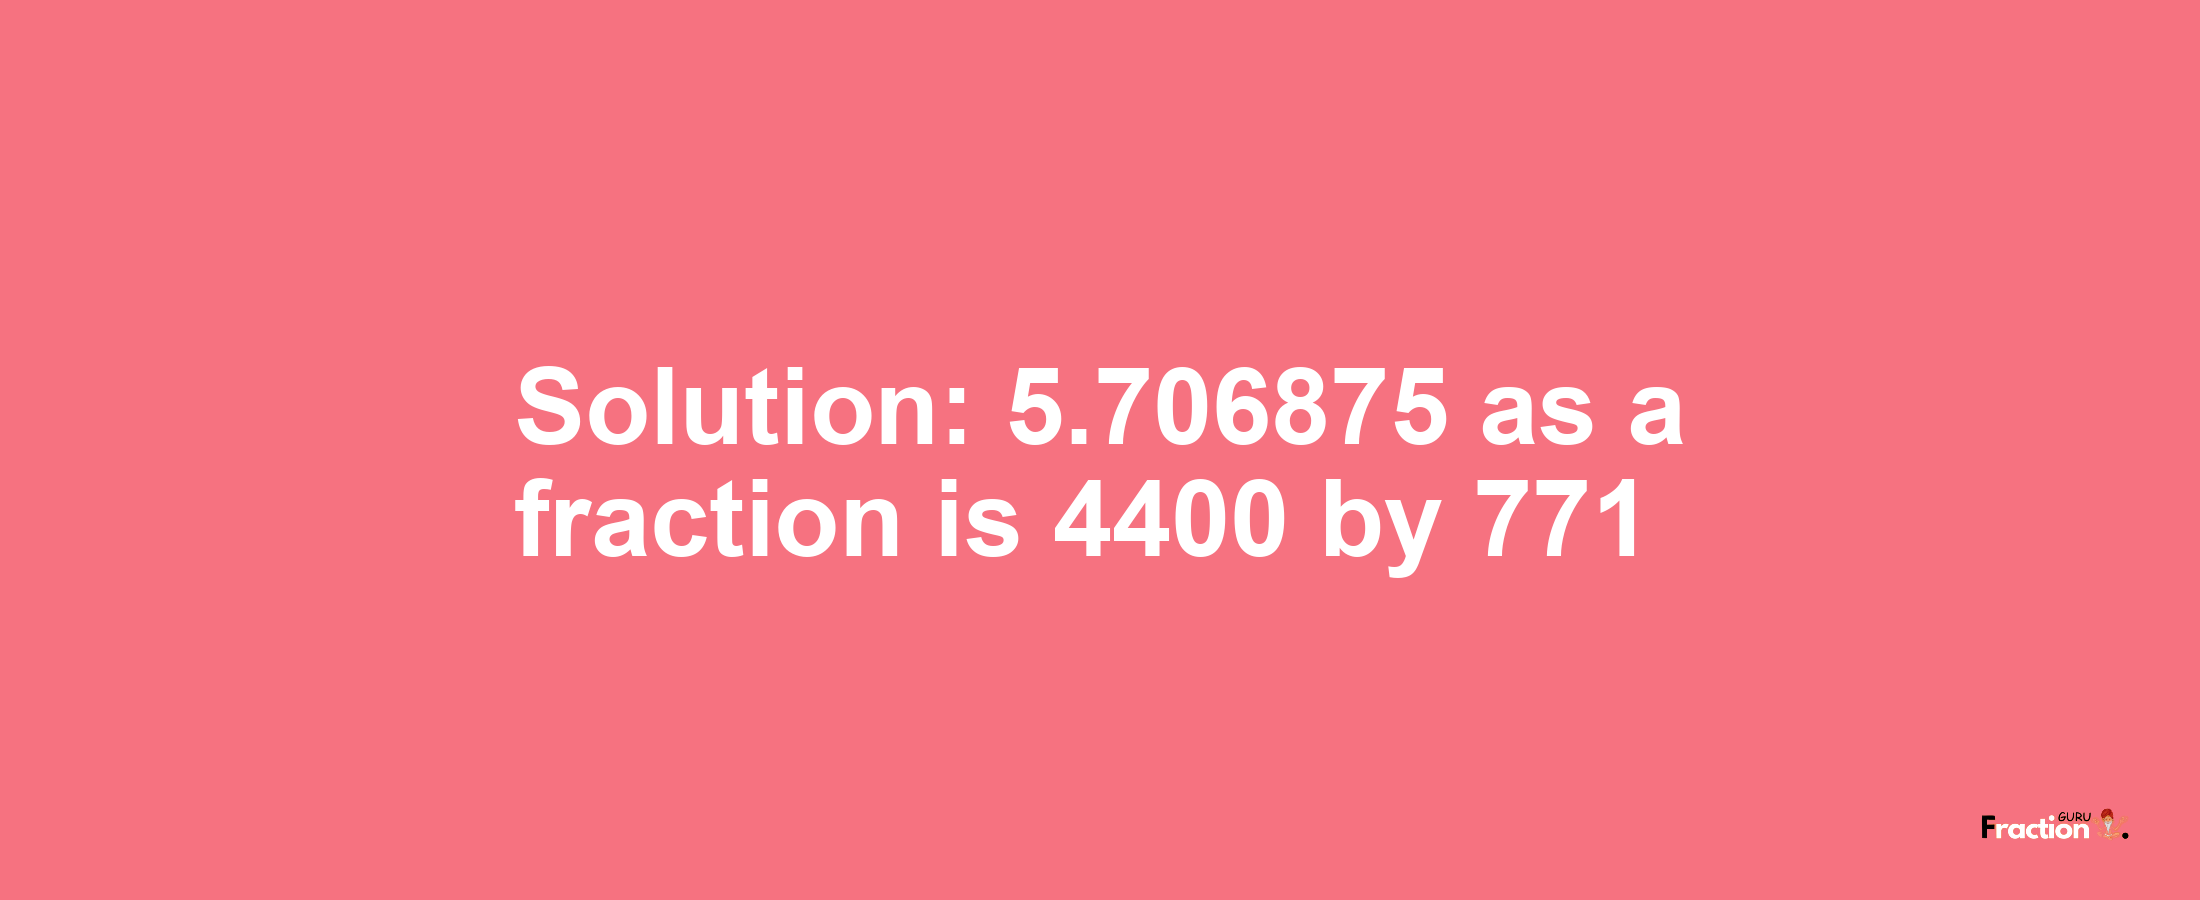 Solution:5.706875 as a fraction is 4400/771